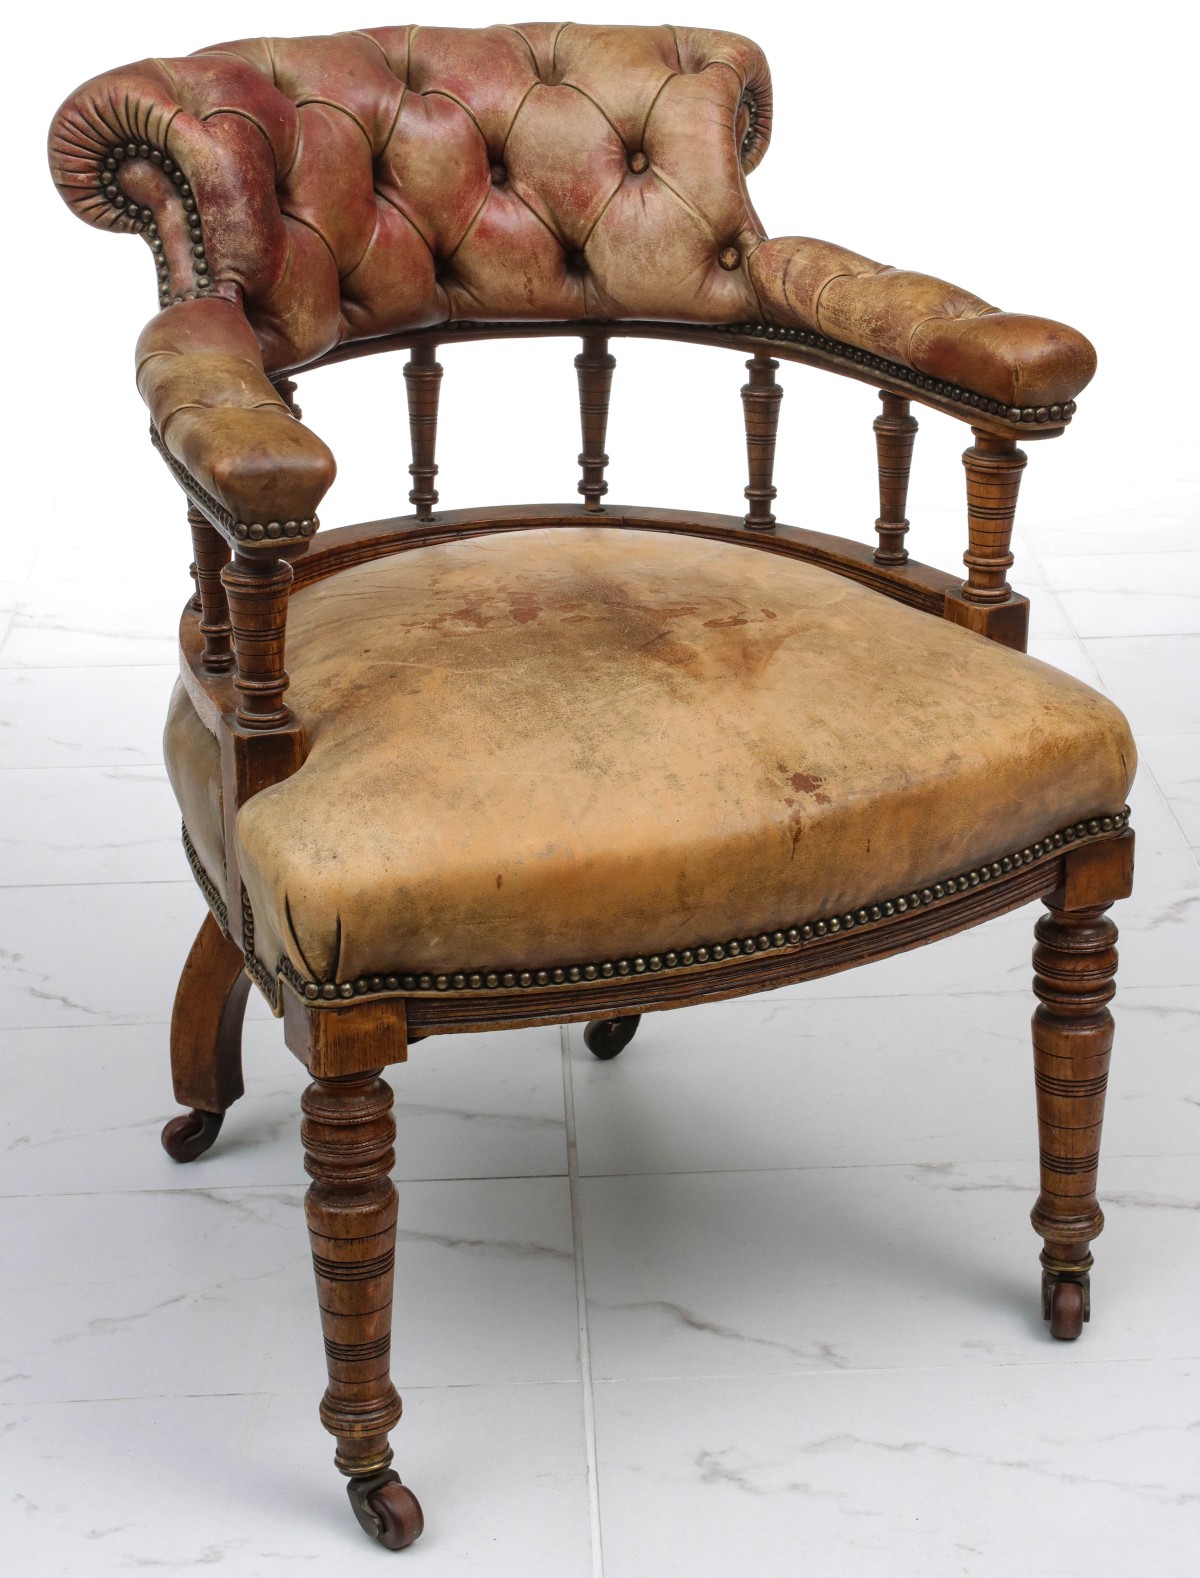 A 19C. ENGLISH BARREL BACK CHAIR IN ORIGINAL LEATHER